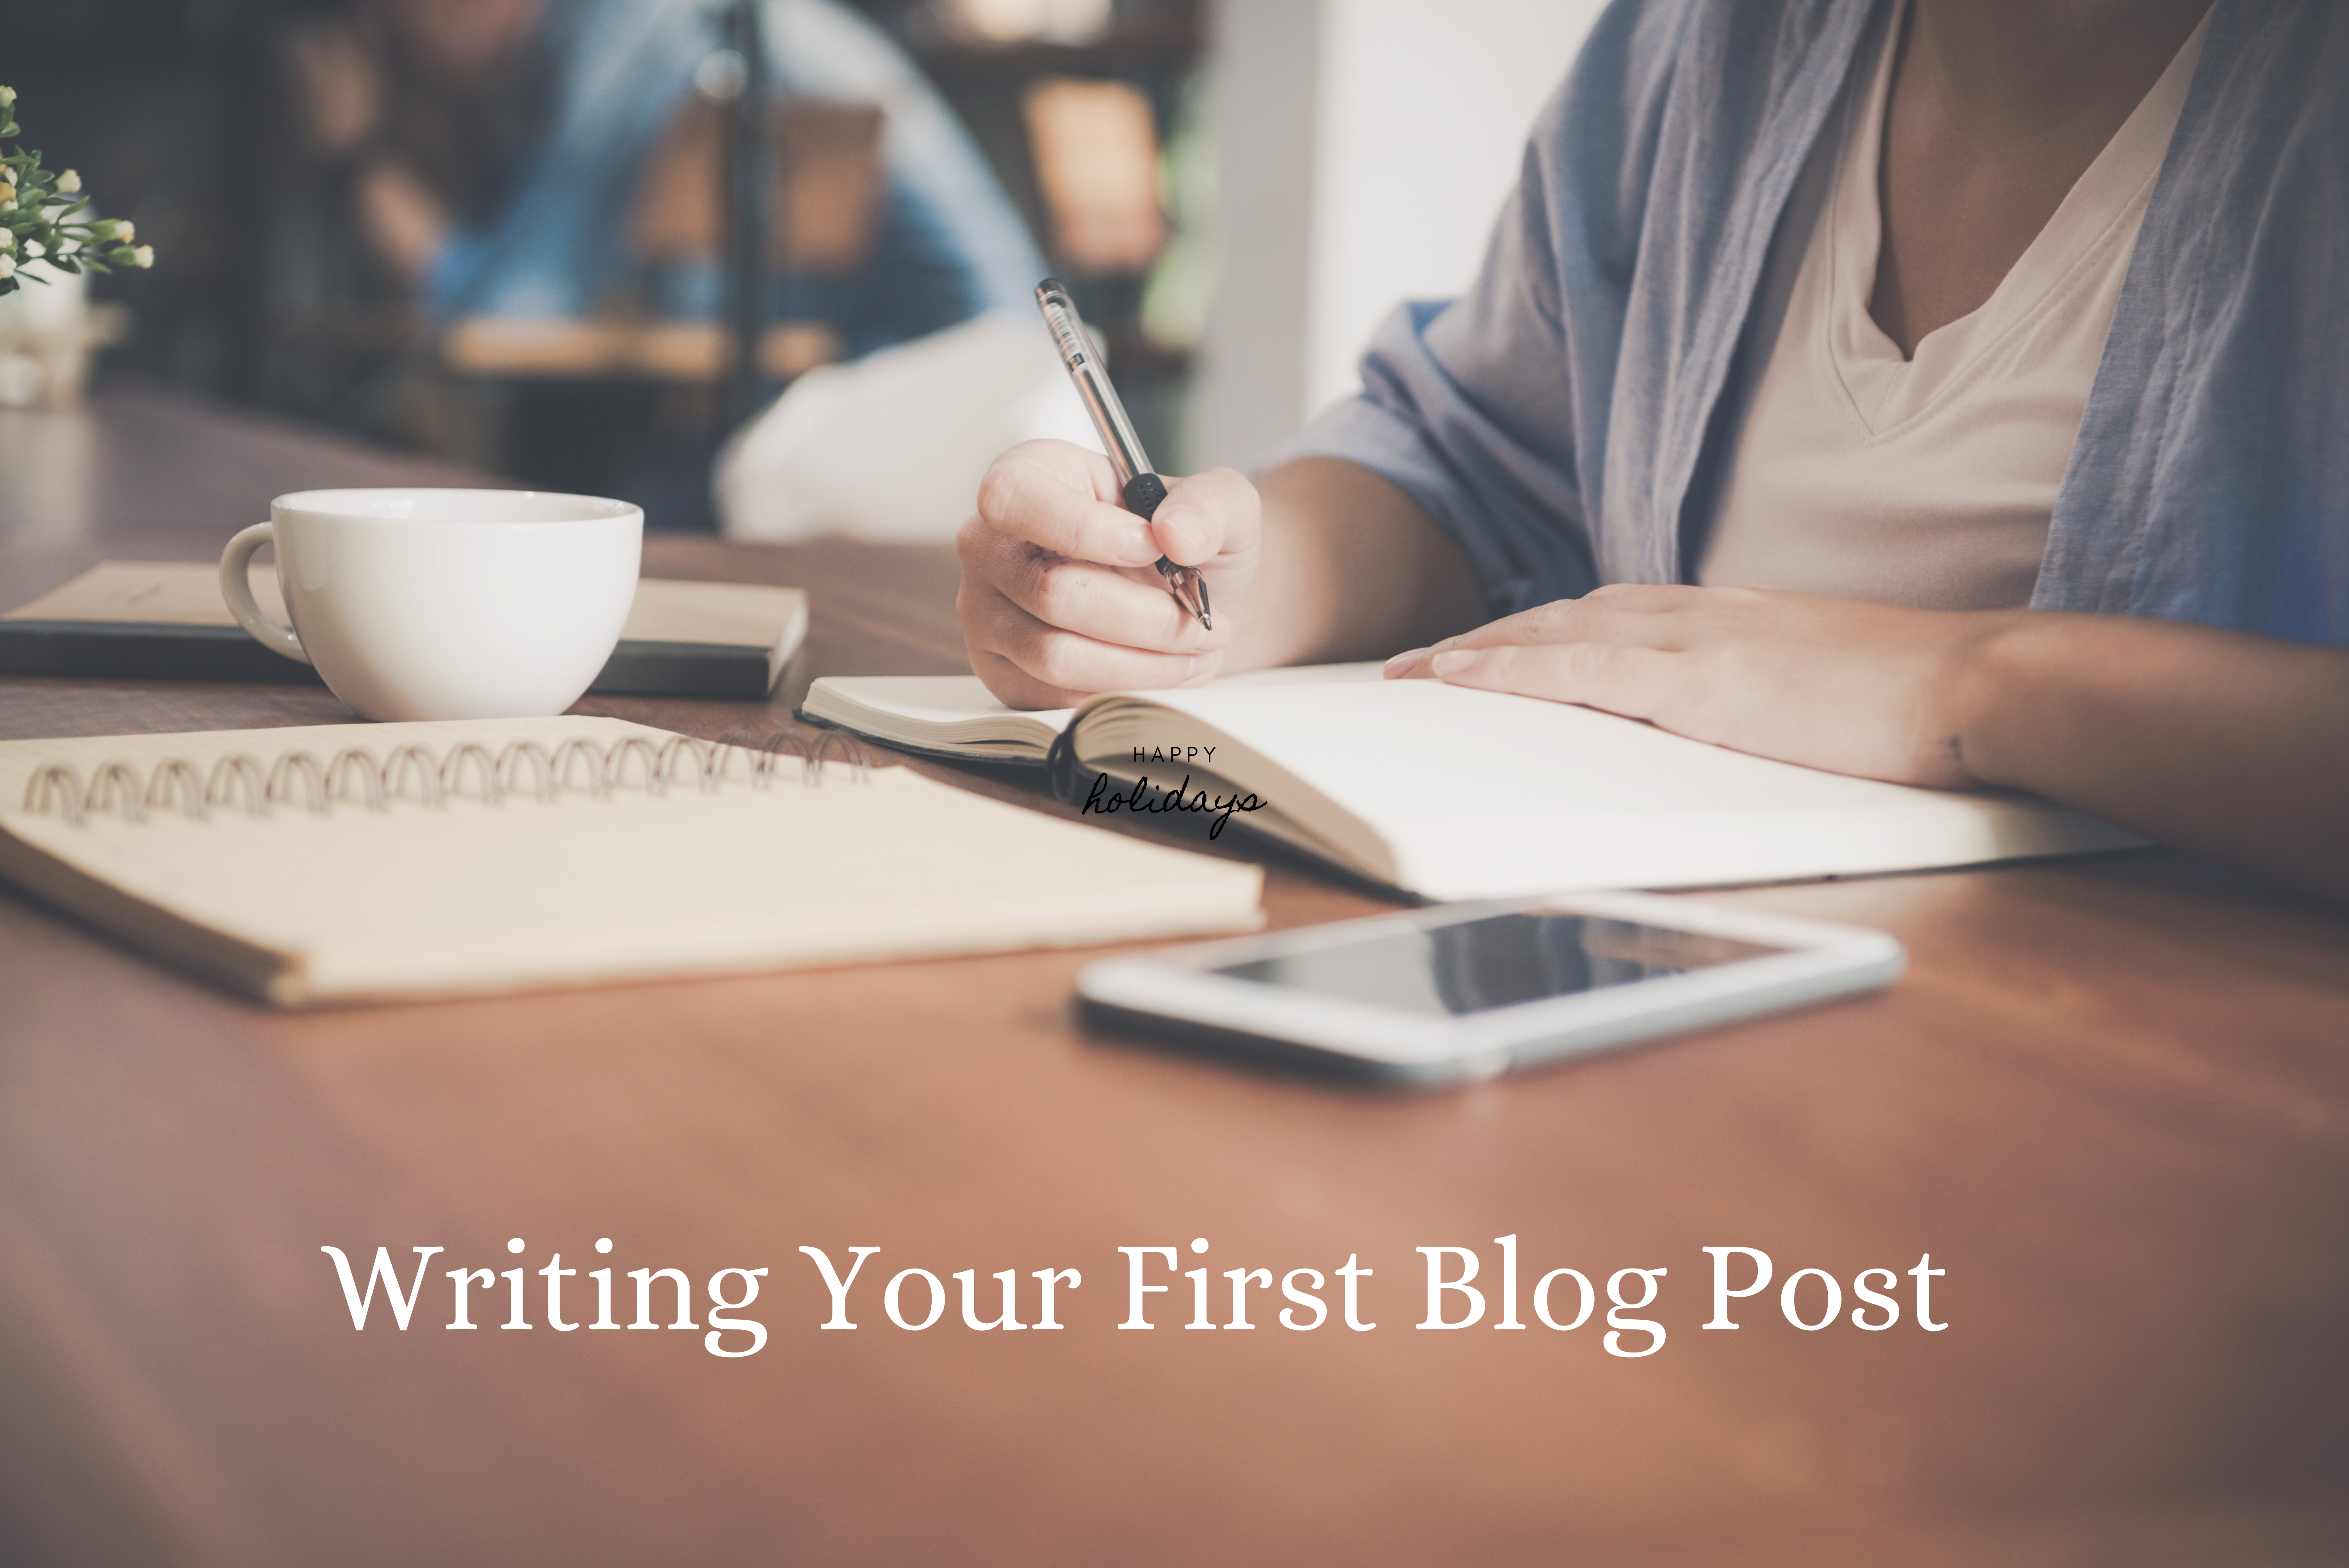 From Blank Page to Writing Your First Blog Post: 5 Tips to Get You Started